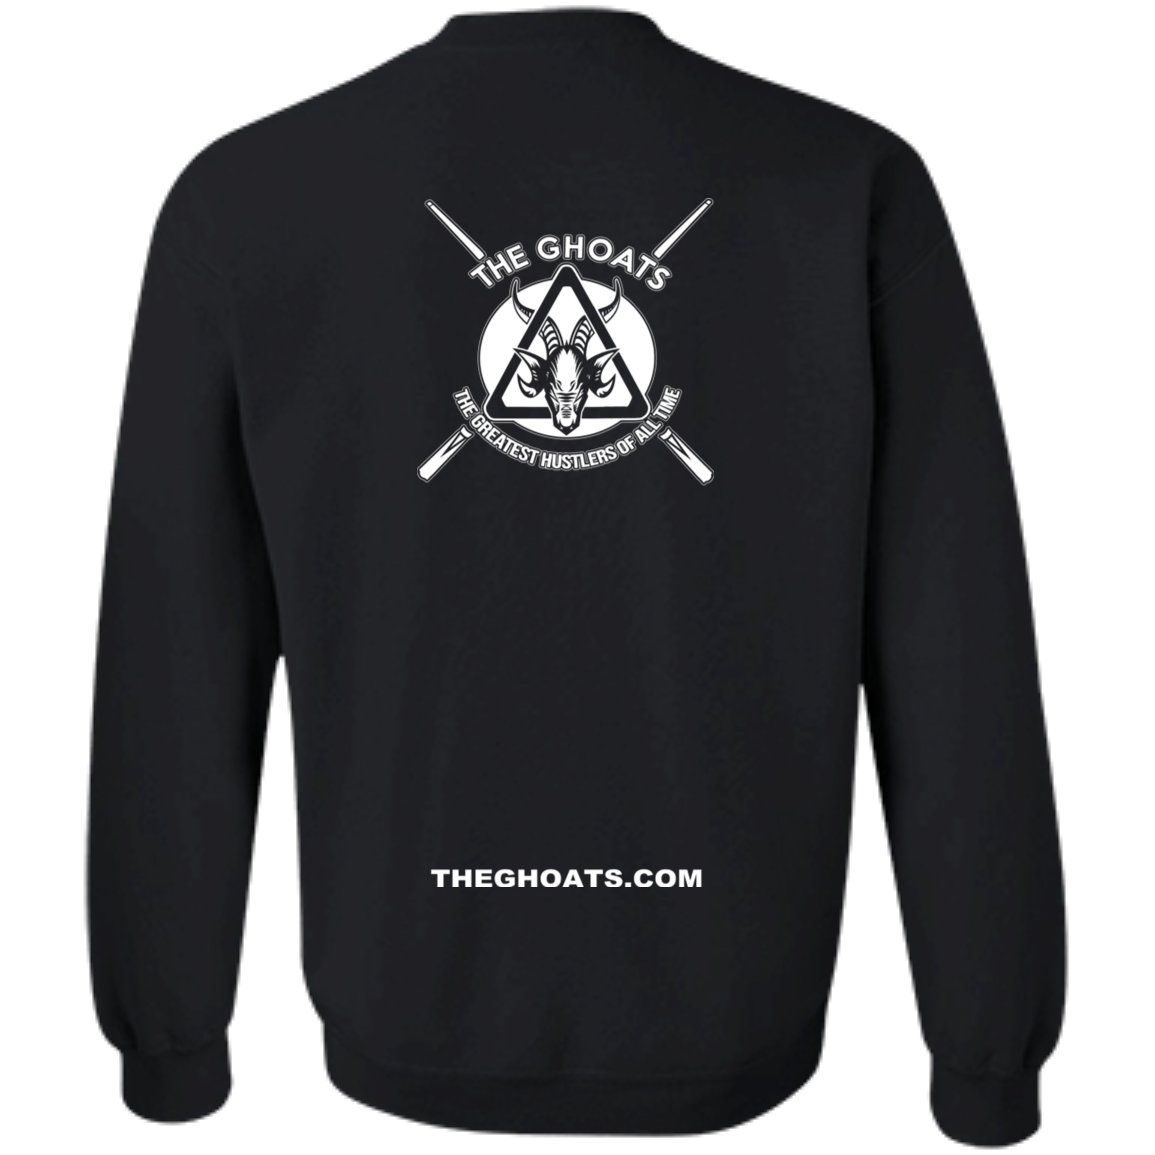 The GHOATS Custom Design. #11 Families That Hustle Together, Stay Together. Crewneck Pullover Sweatshirt